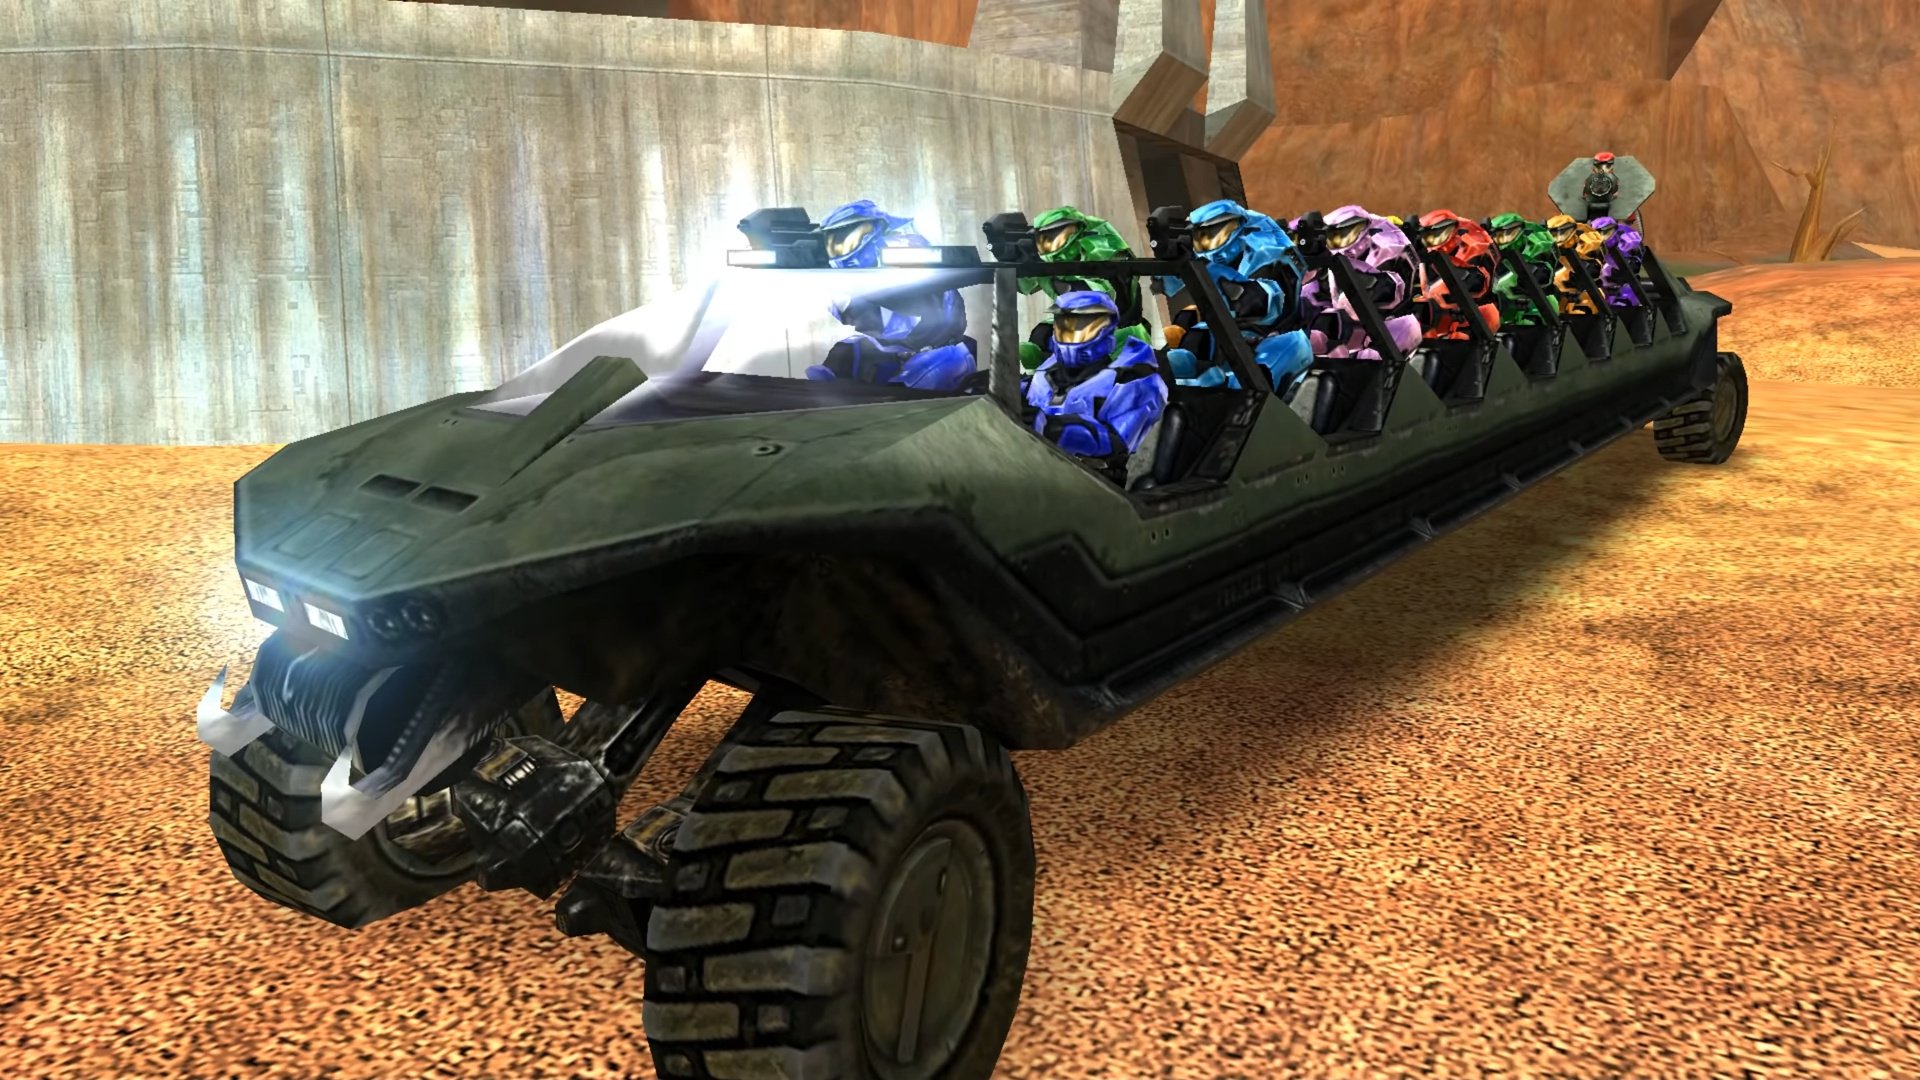 Cursed Halo Images.